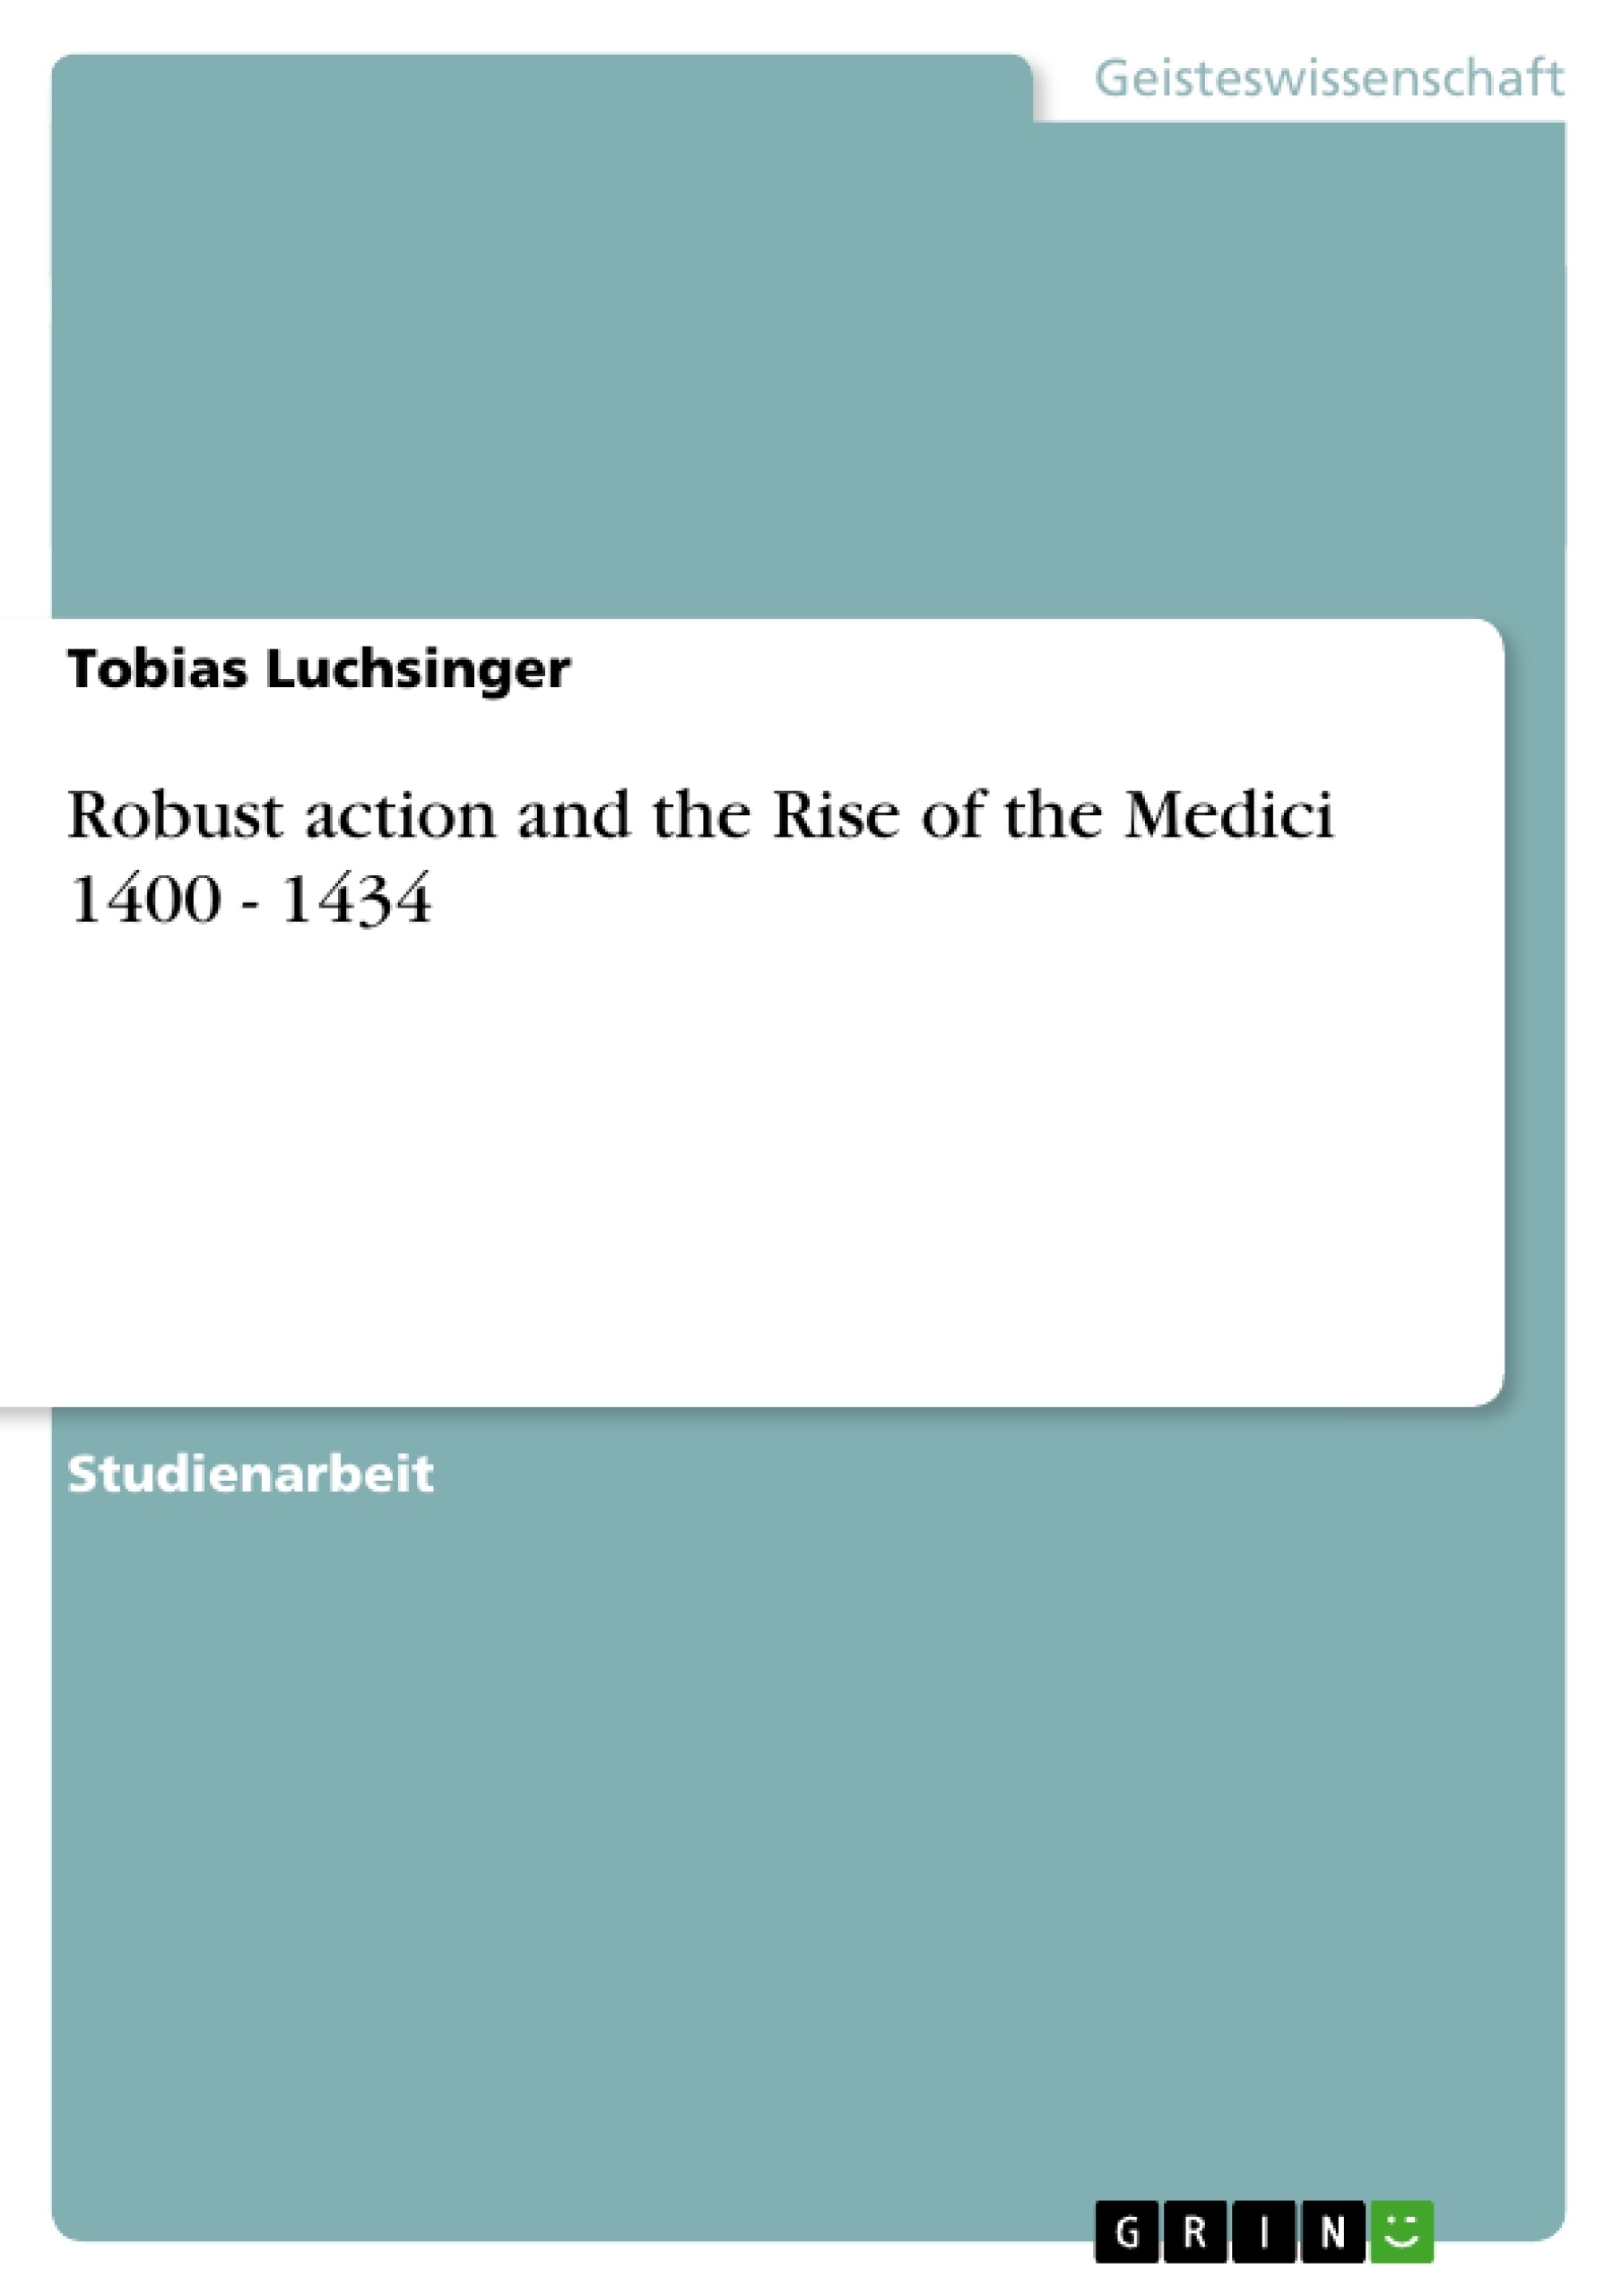 Titre: Robust action and the Rise of the Medici 1400 - 1434